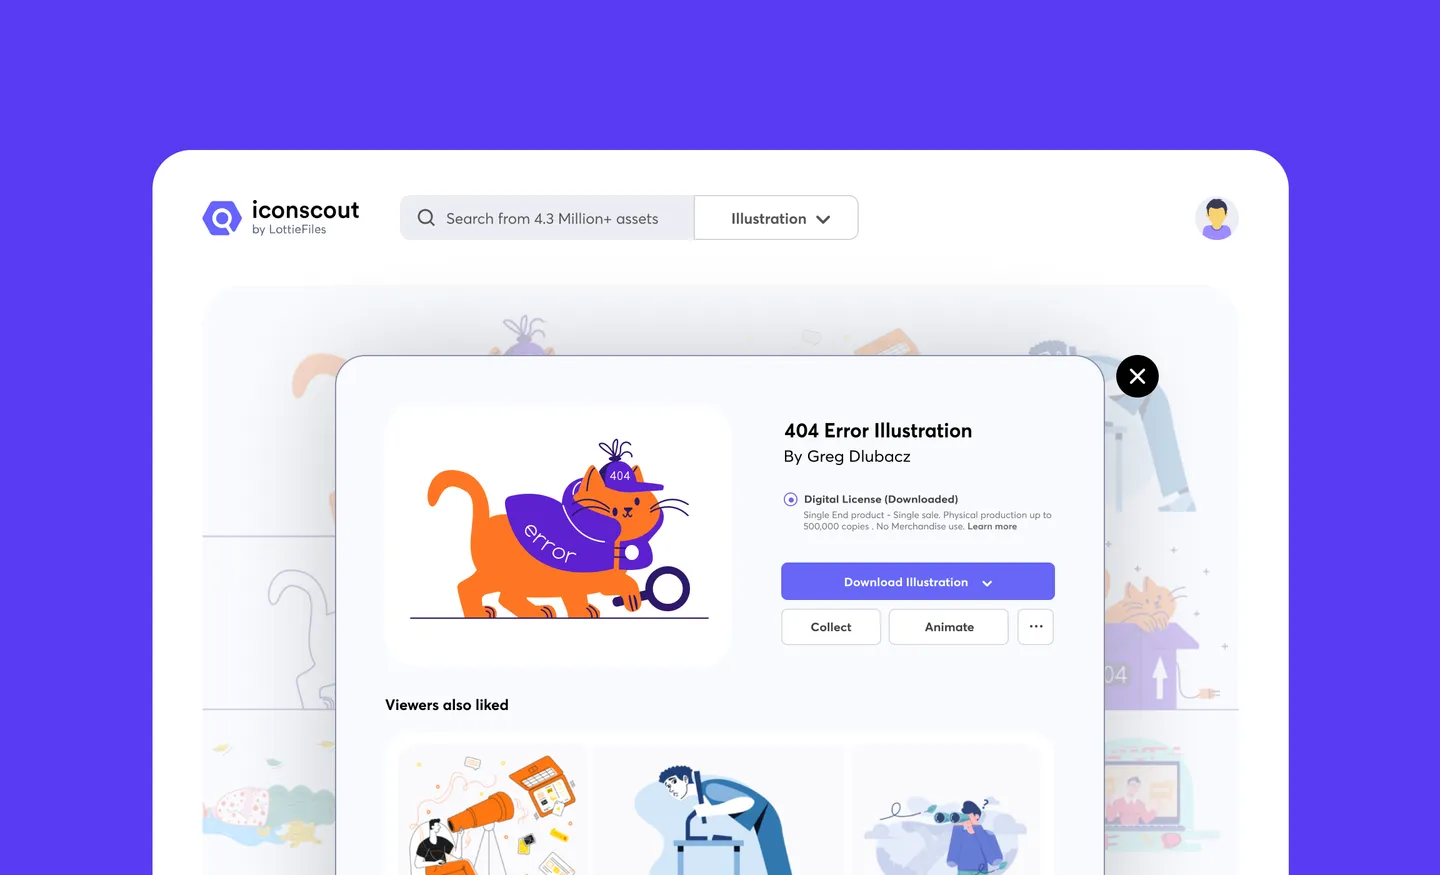 It’s now easier to navigate Iconscout